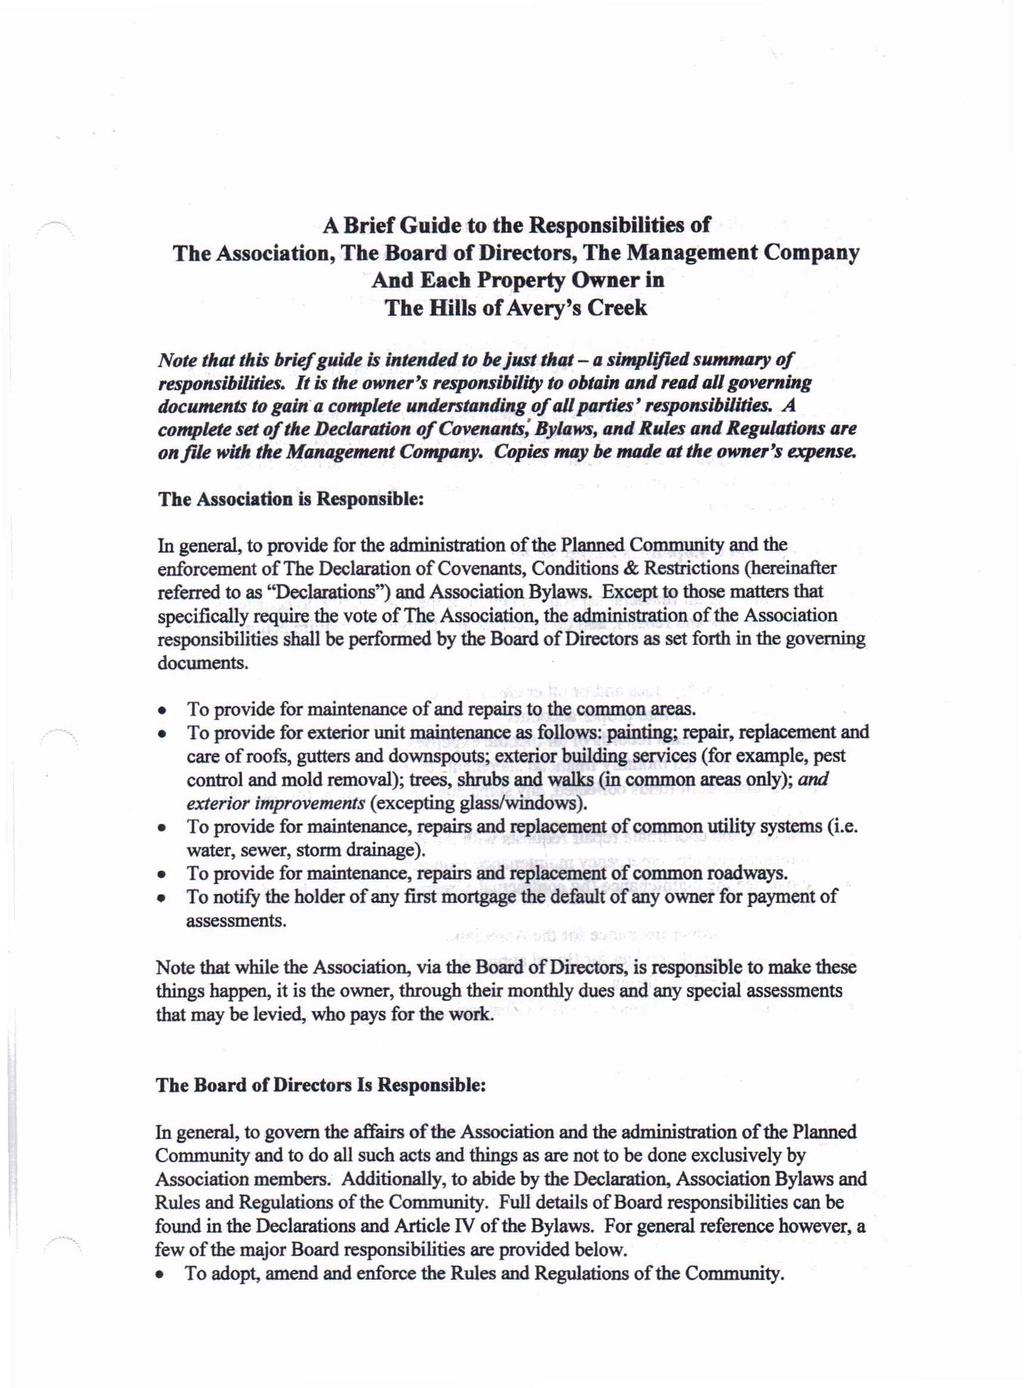 A Brief Guide to the Responsibilities of The Association, The Board of Directors, The Management Company And Each Property Owner in The Hills of Avery's Creek Note that this brief guide is intended